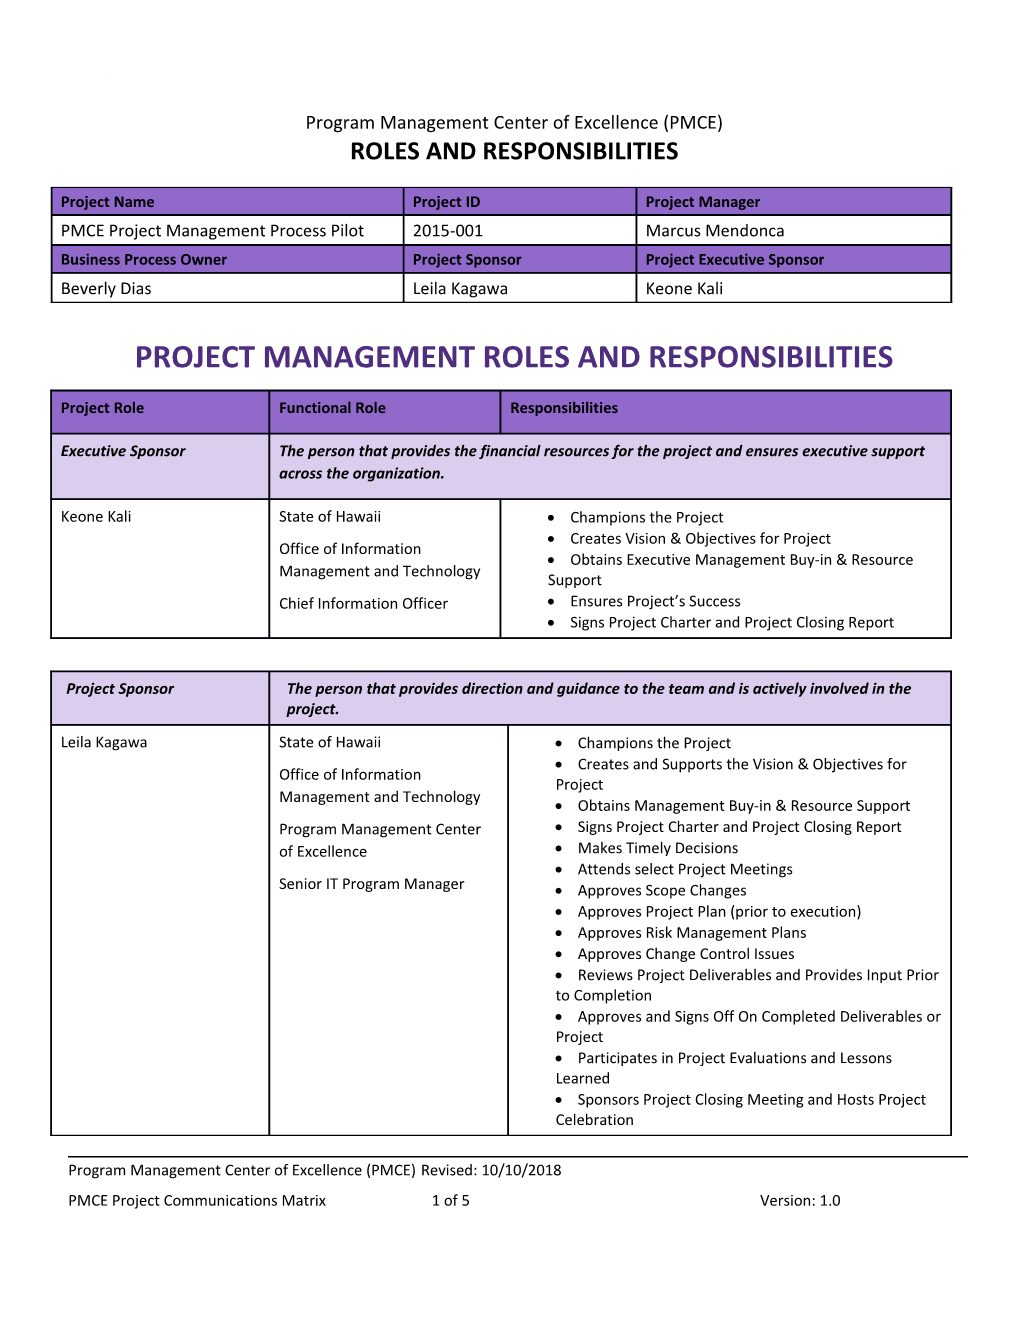 Project Management Roles and Responsibilities